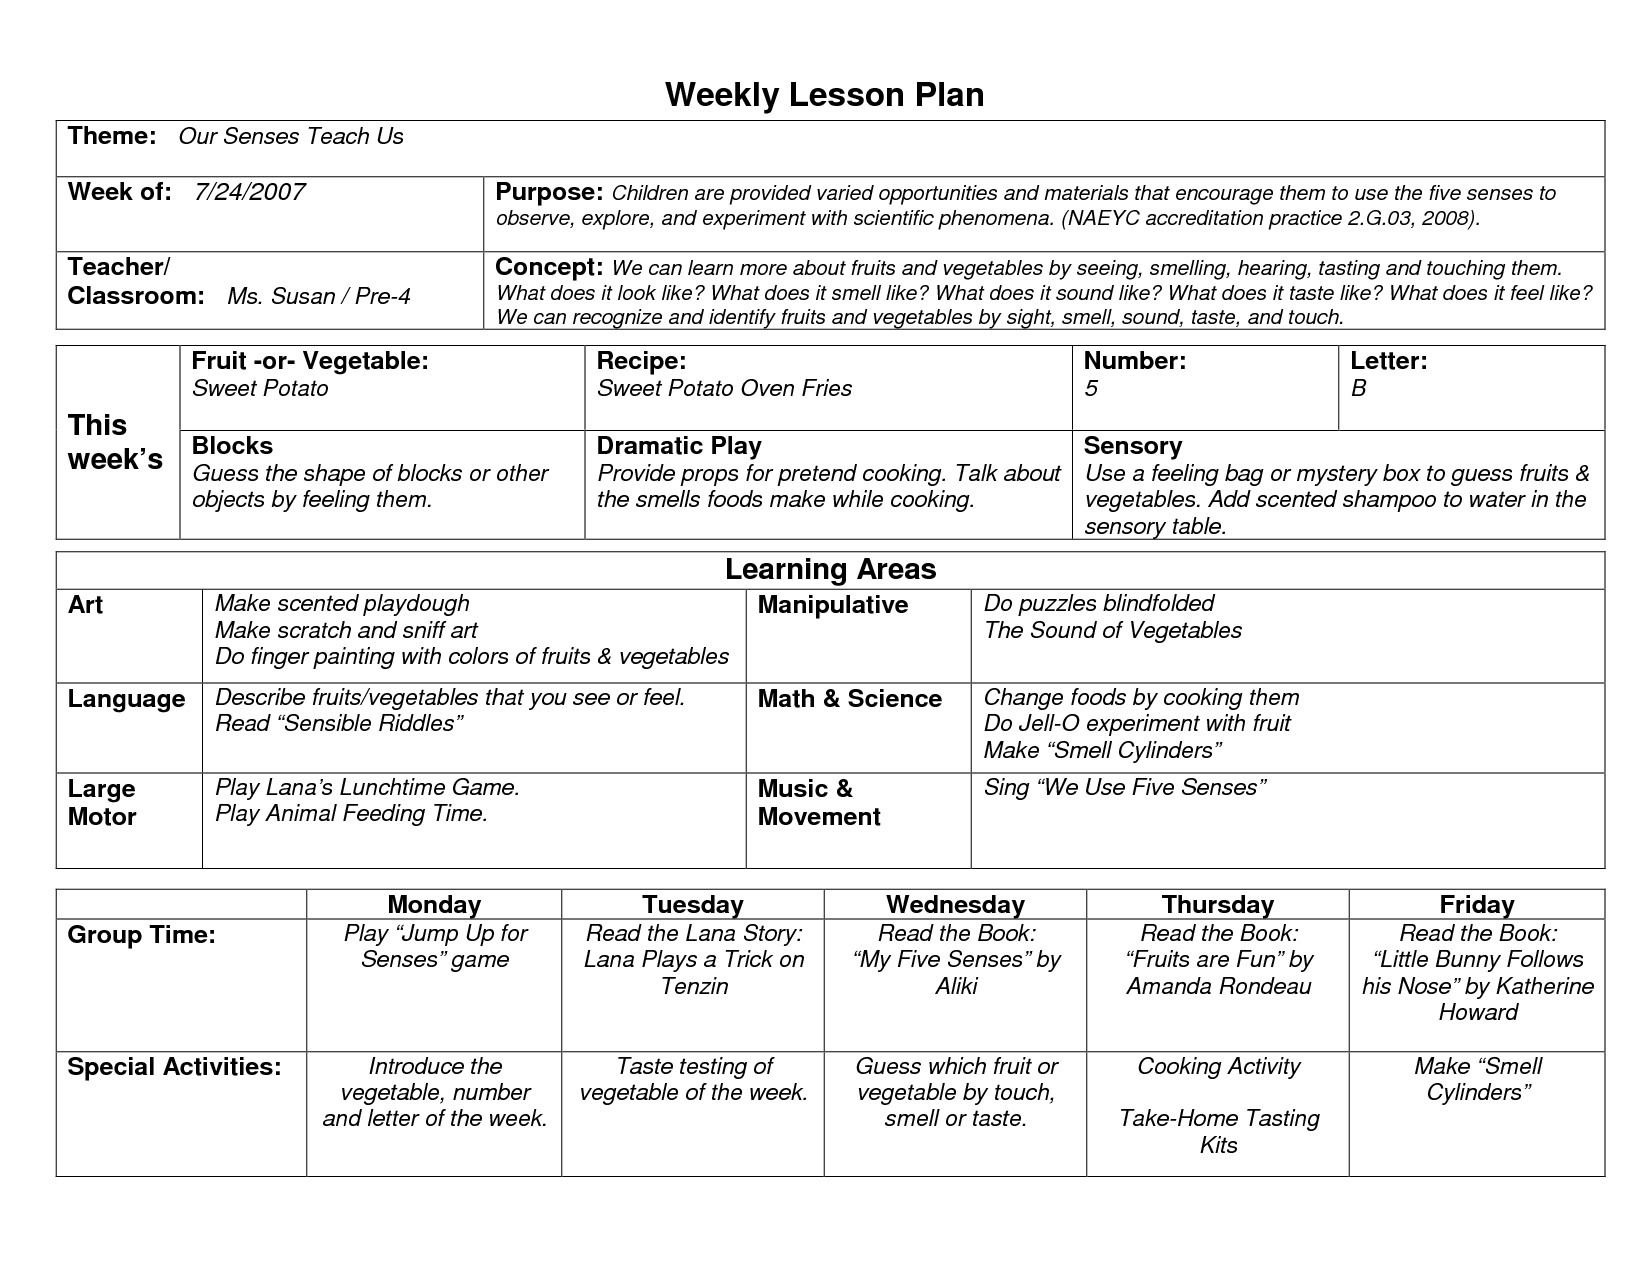 Lesson Plan Objectives How to Write Objectives for Preschool Lesson Plans